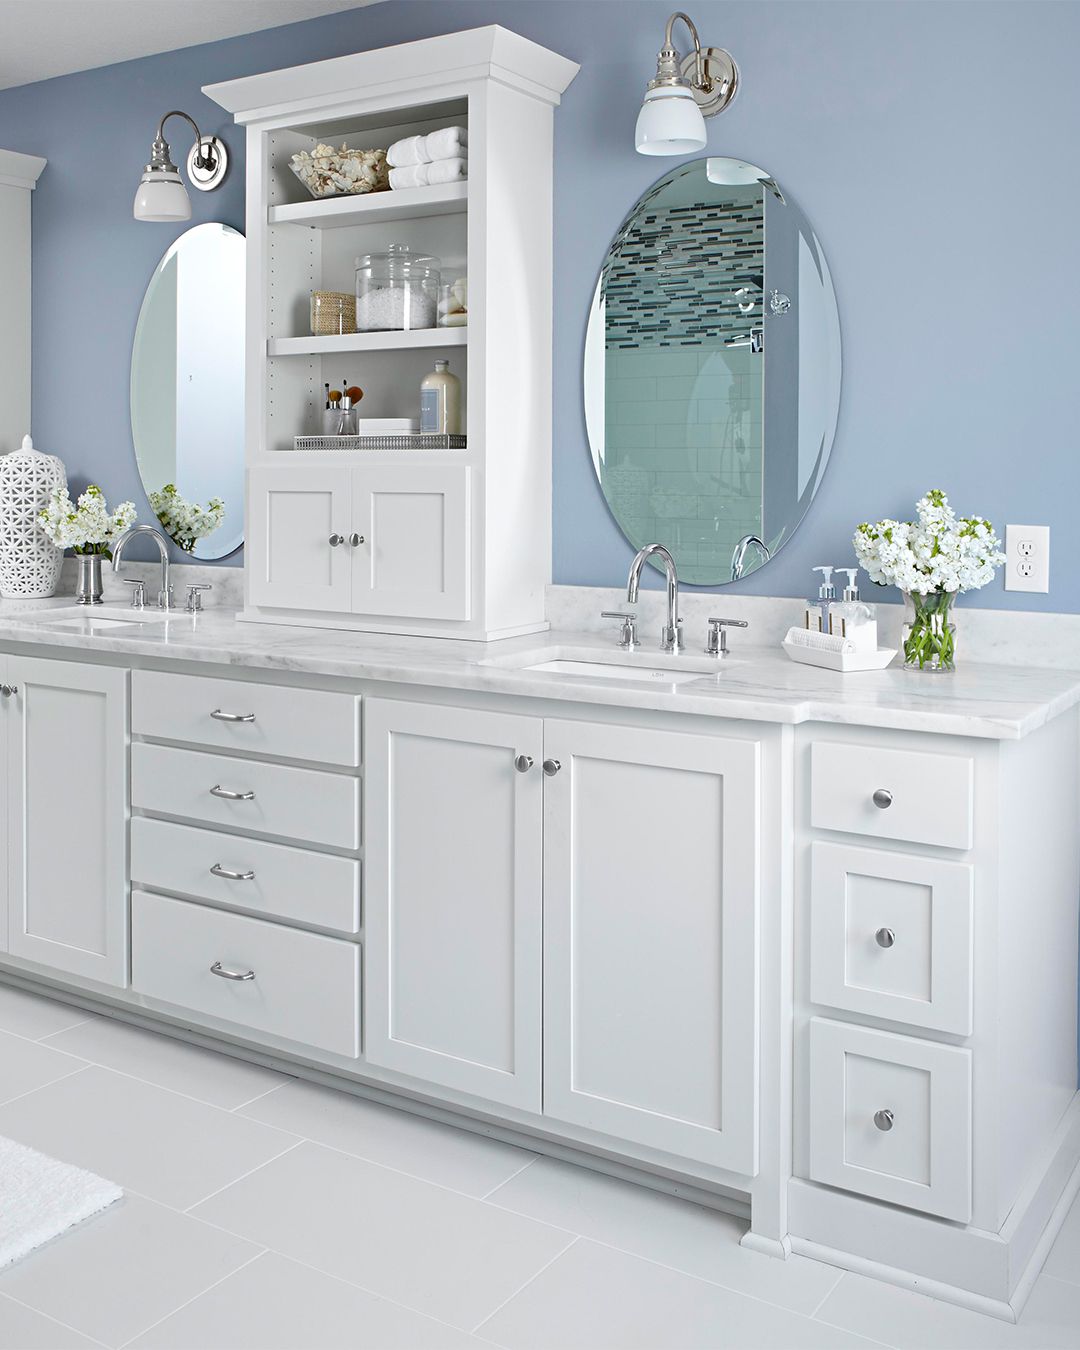 12 Popular Bathroom Paint Colors Our Editors Swear By ...